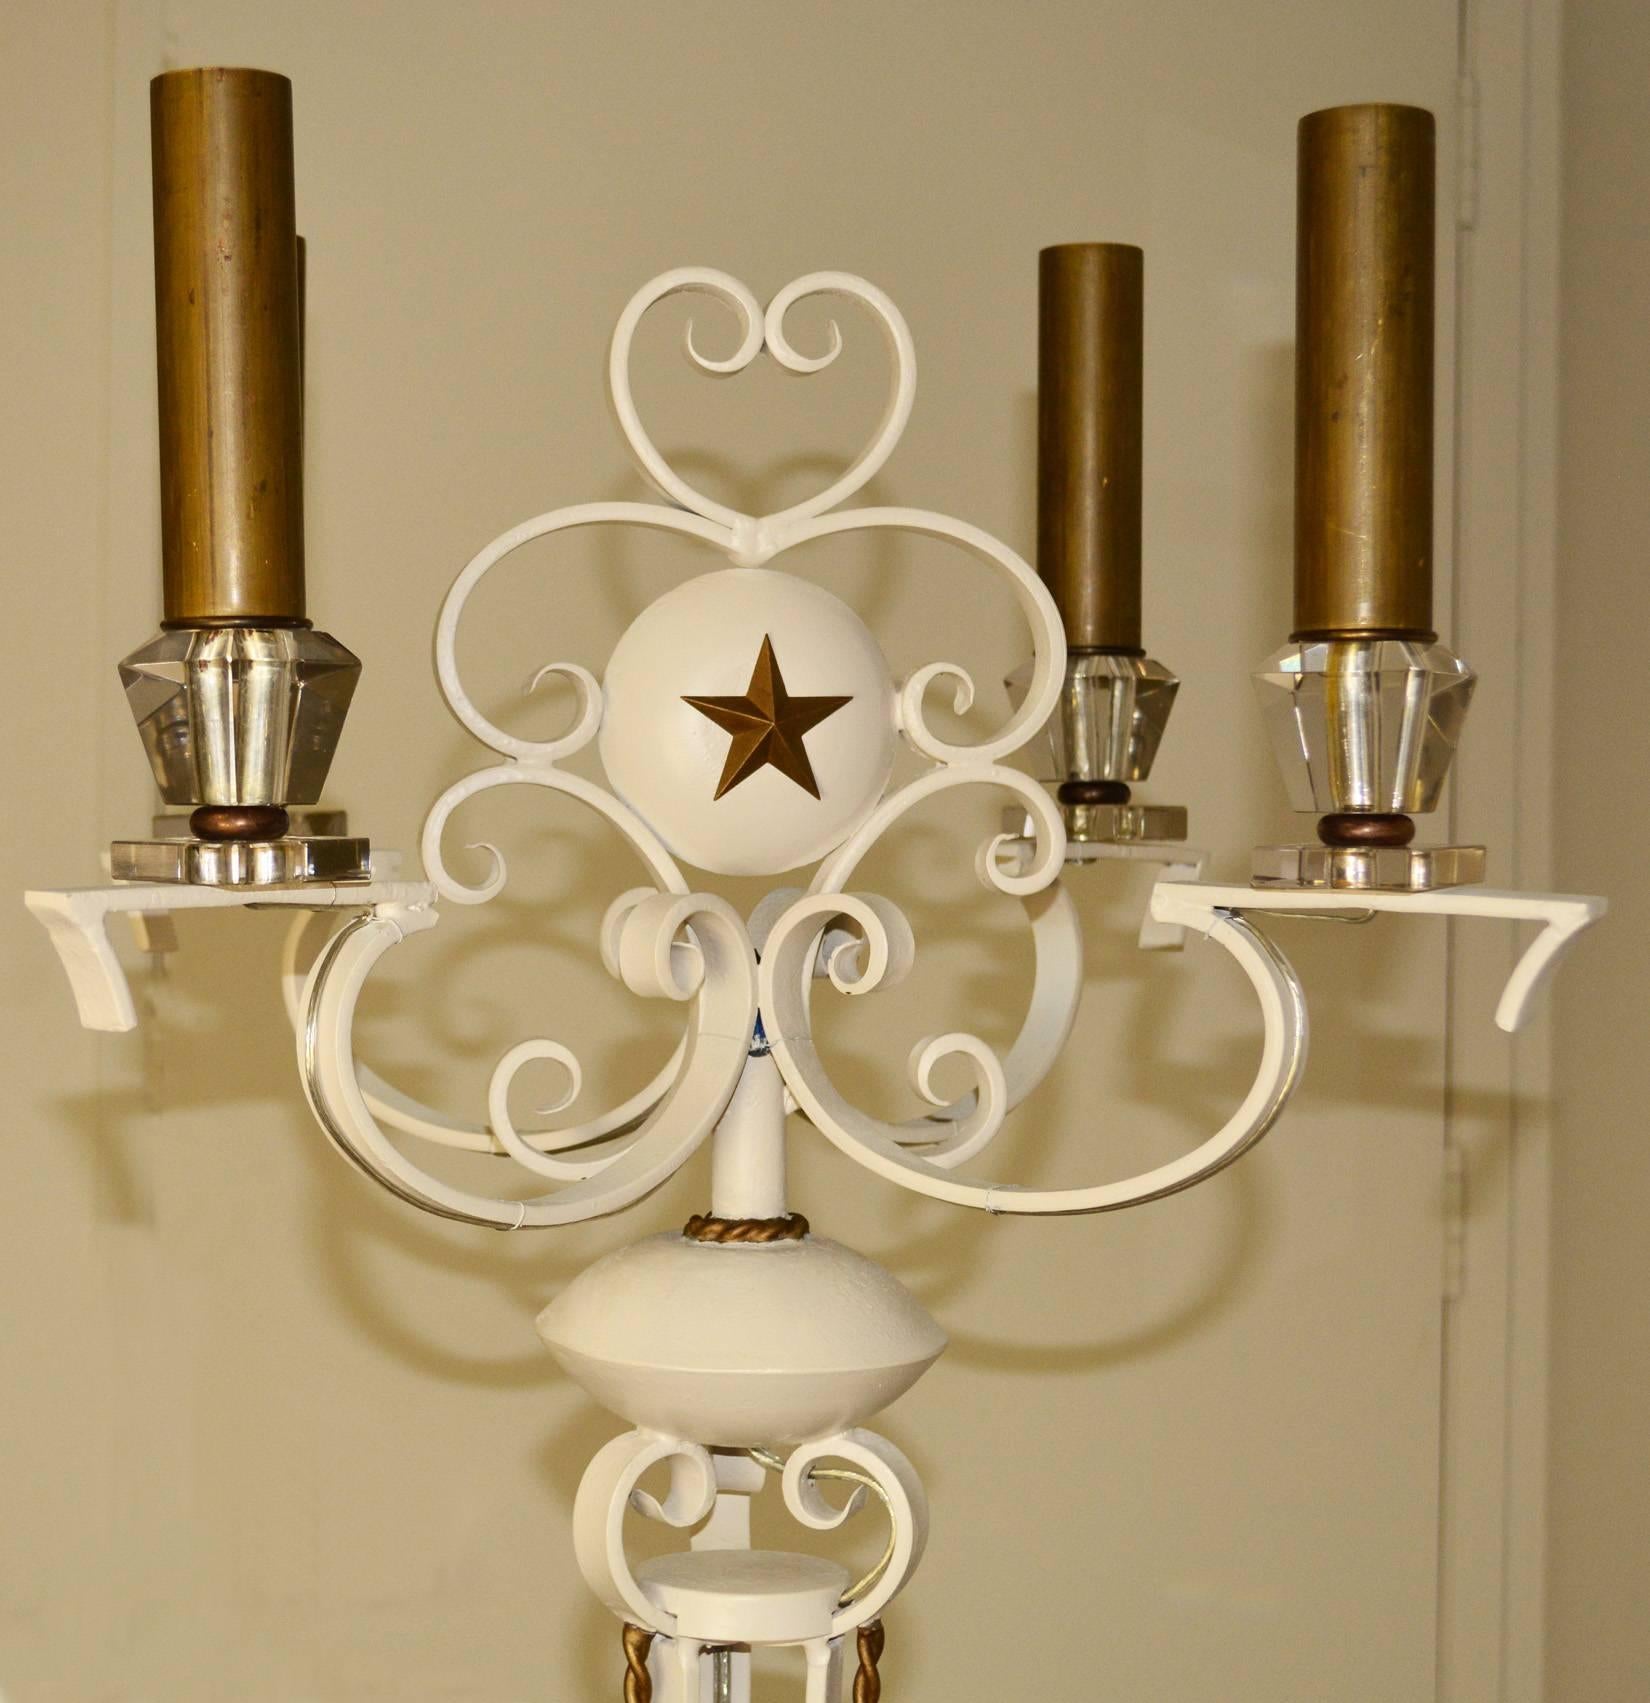 Vintage painted wrought iron floor lamp in the style of Arlus with gold painted twist detailing and four crystal bobeche and candle holders. Perfect for an interior inspired by the French Riviera, Arbus, Jansen, Royere. 